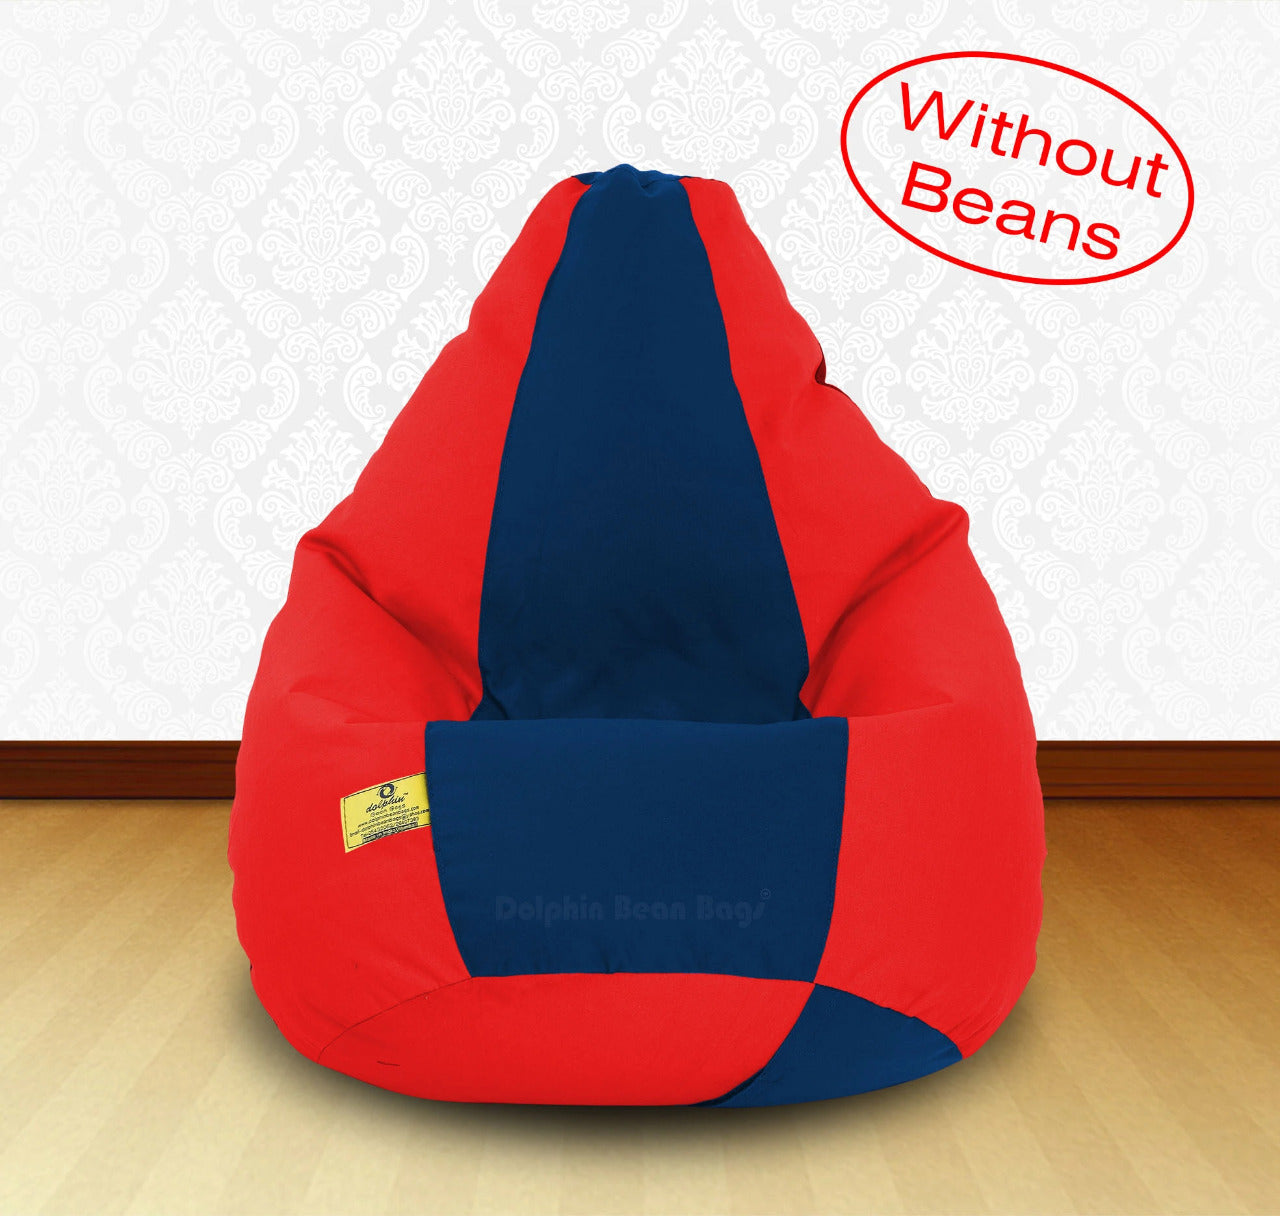 Bean Bag: XXXL Red/R.Blue-FABRIC-COVERS without Beans